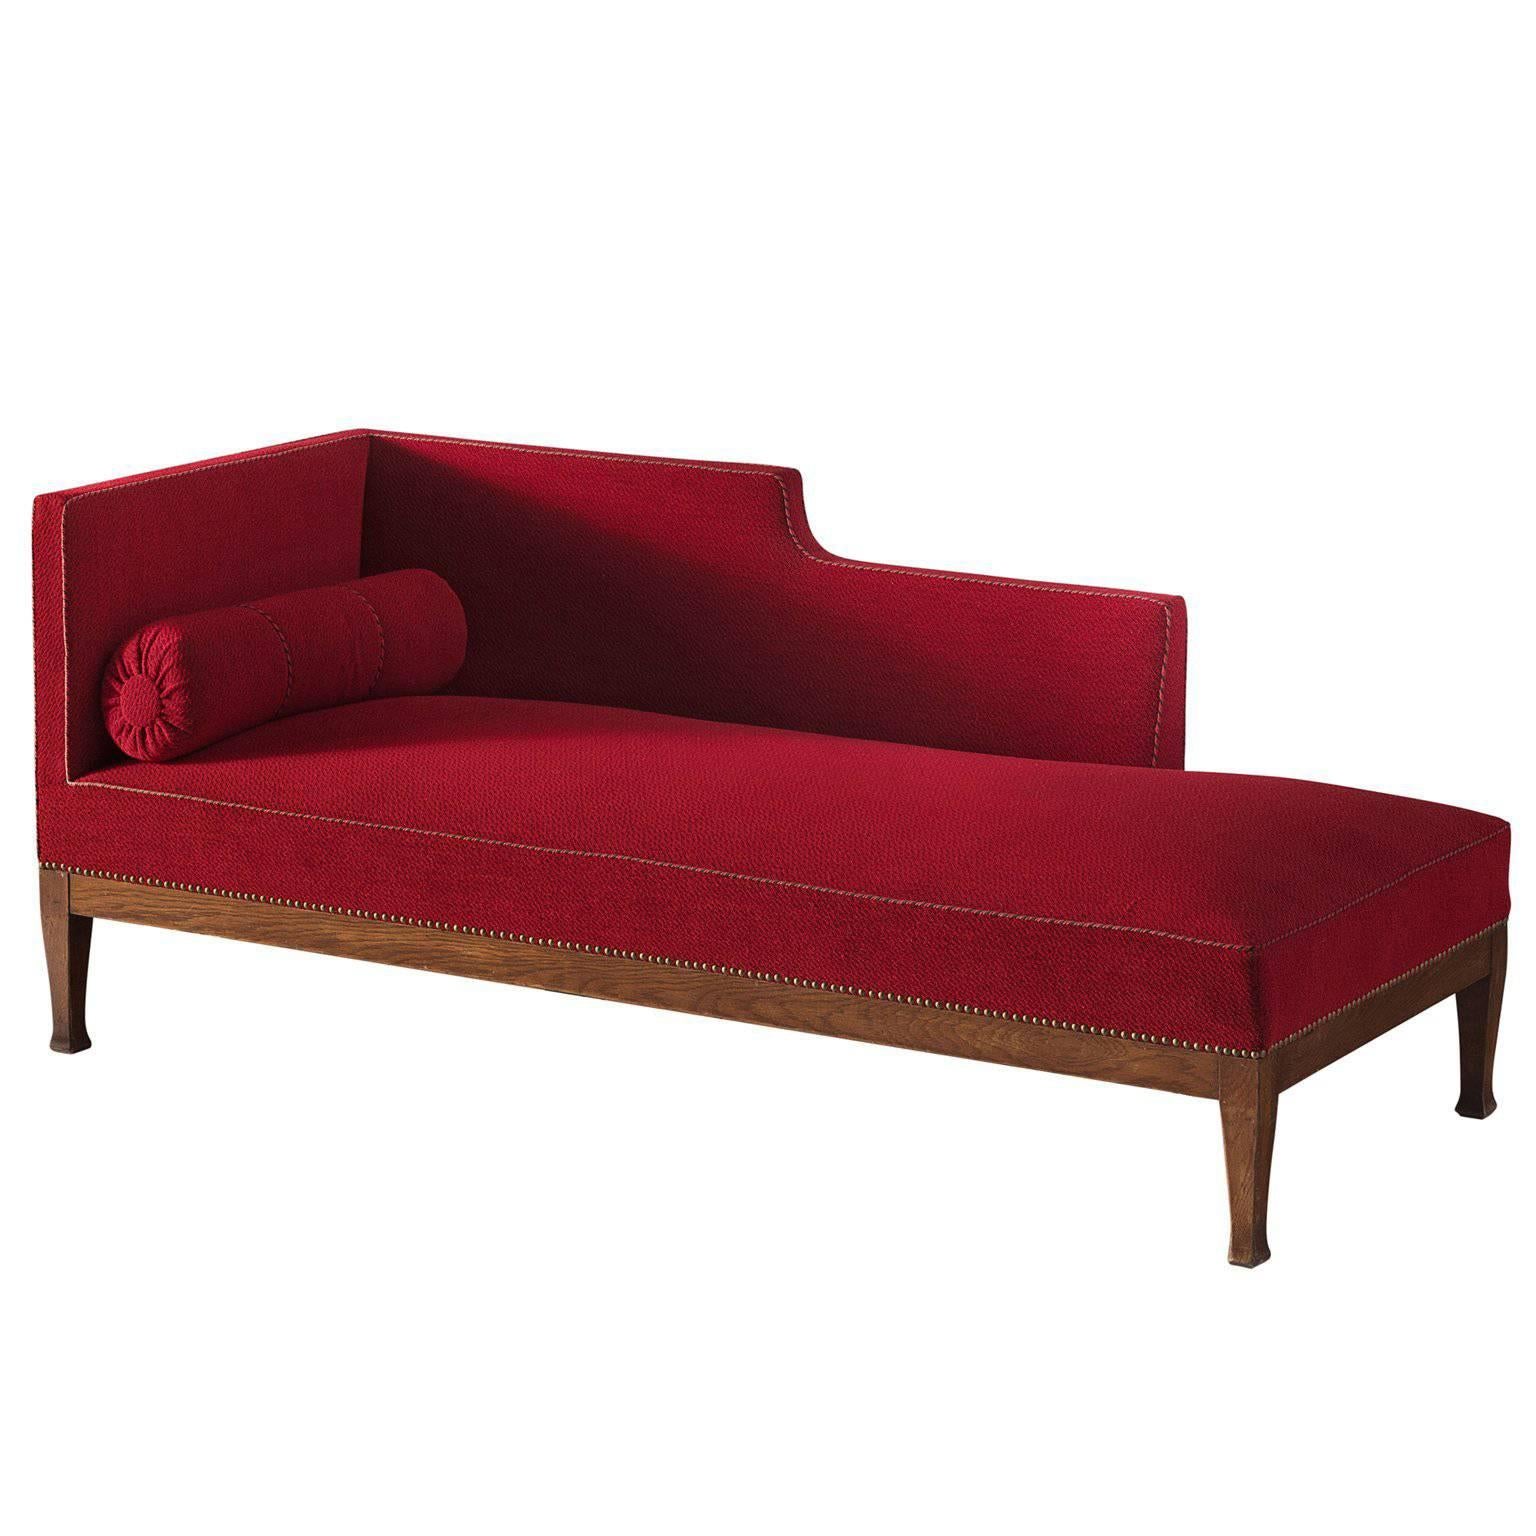 Early Swedish 'Grace' Chaise Longue in Deep Red